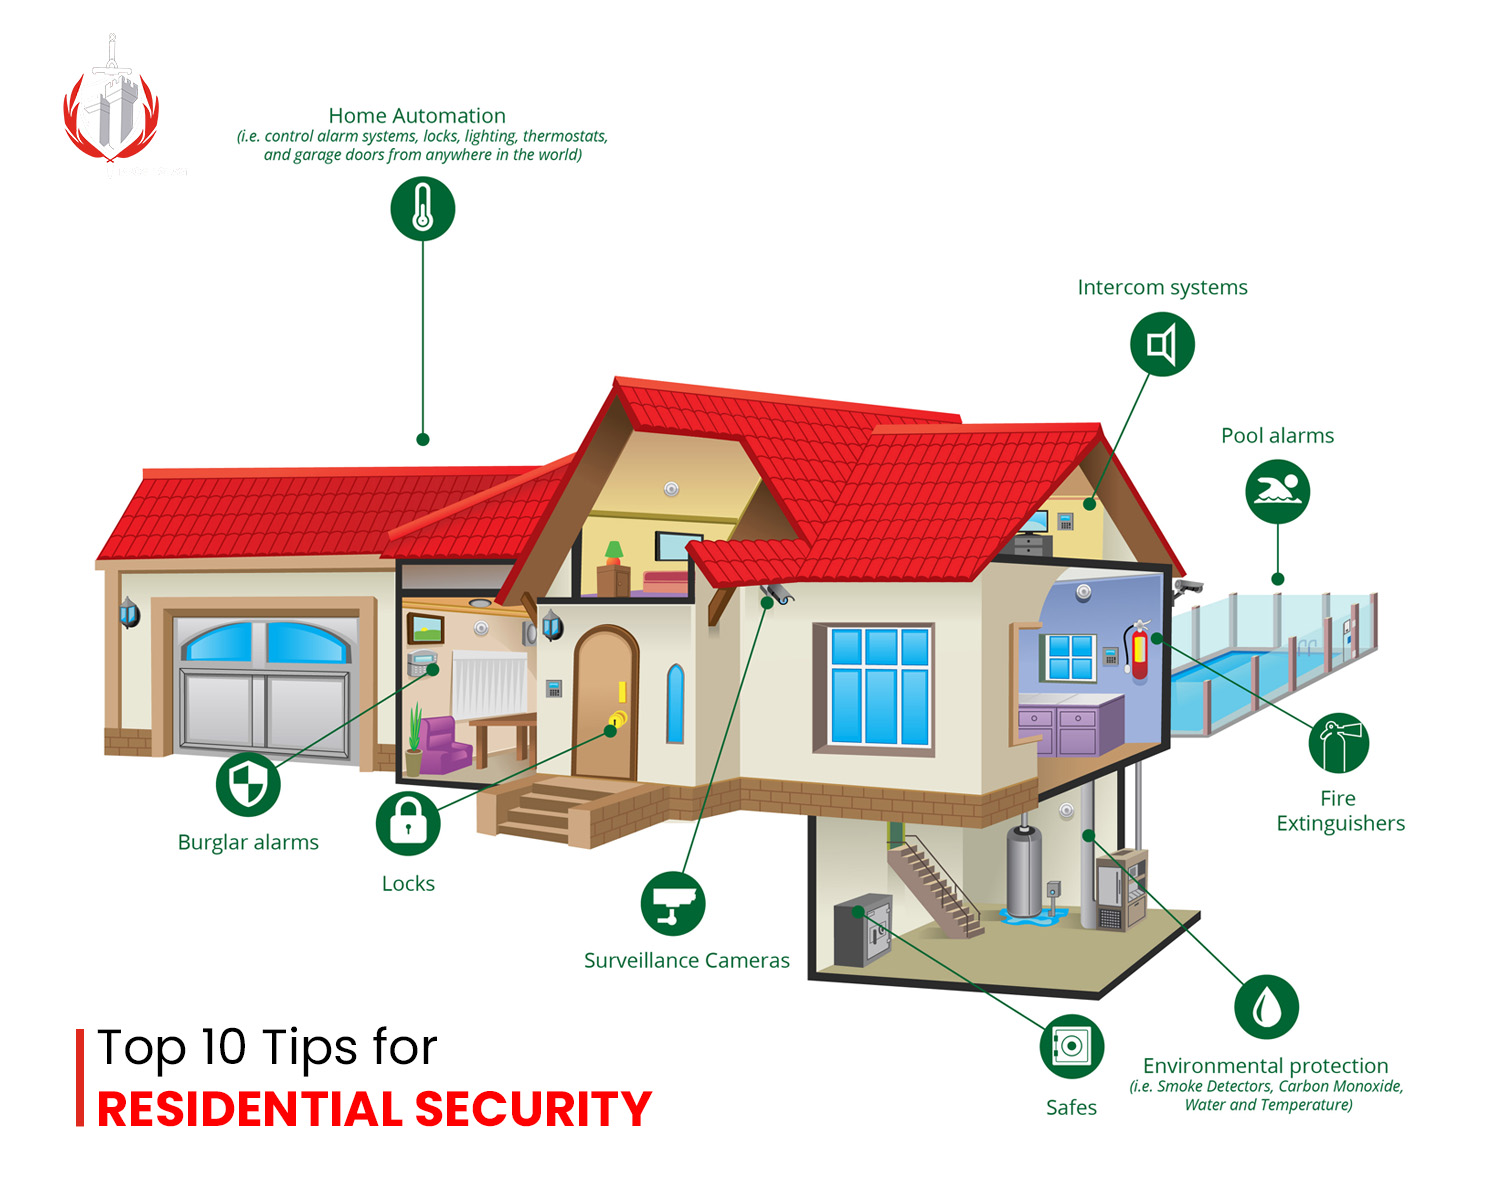 Top 10 Tips for Residential Security